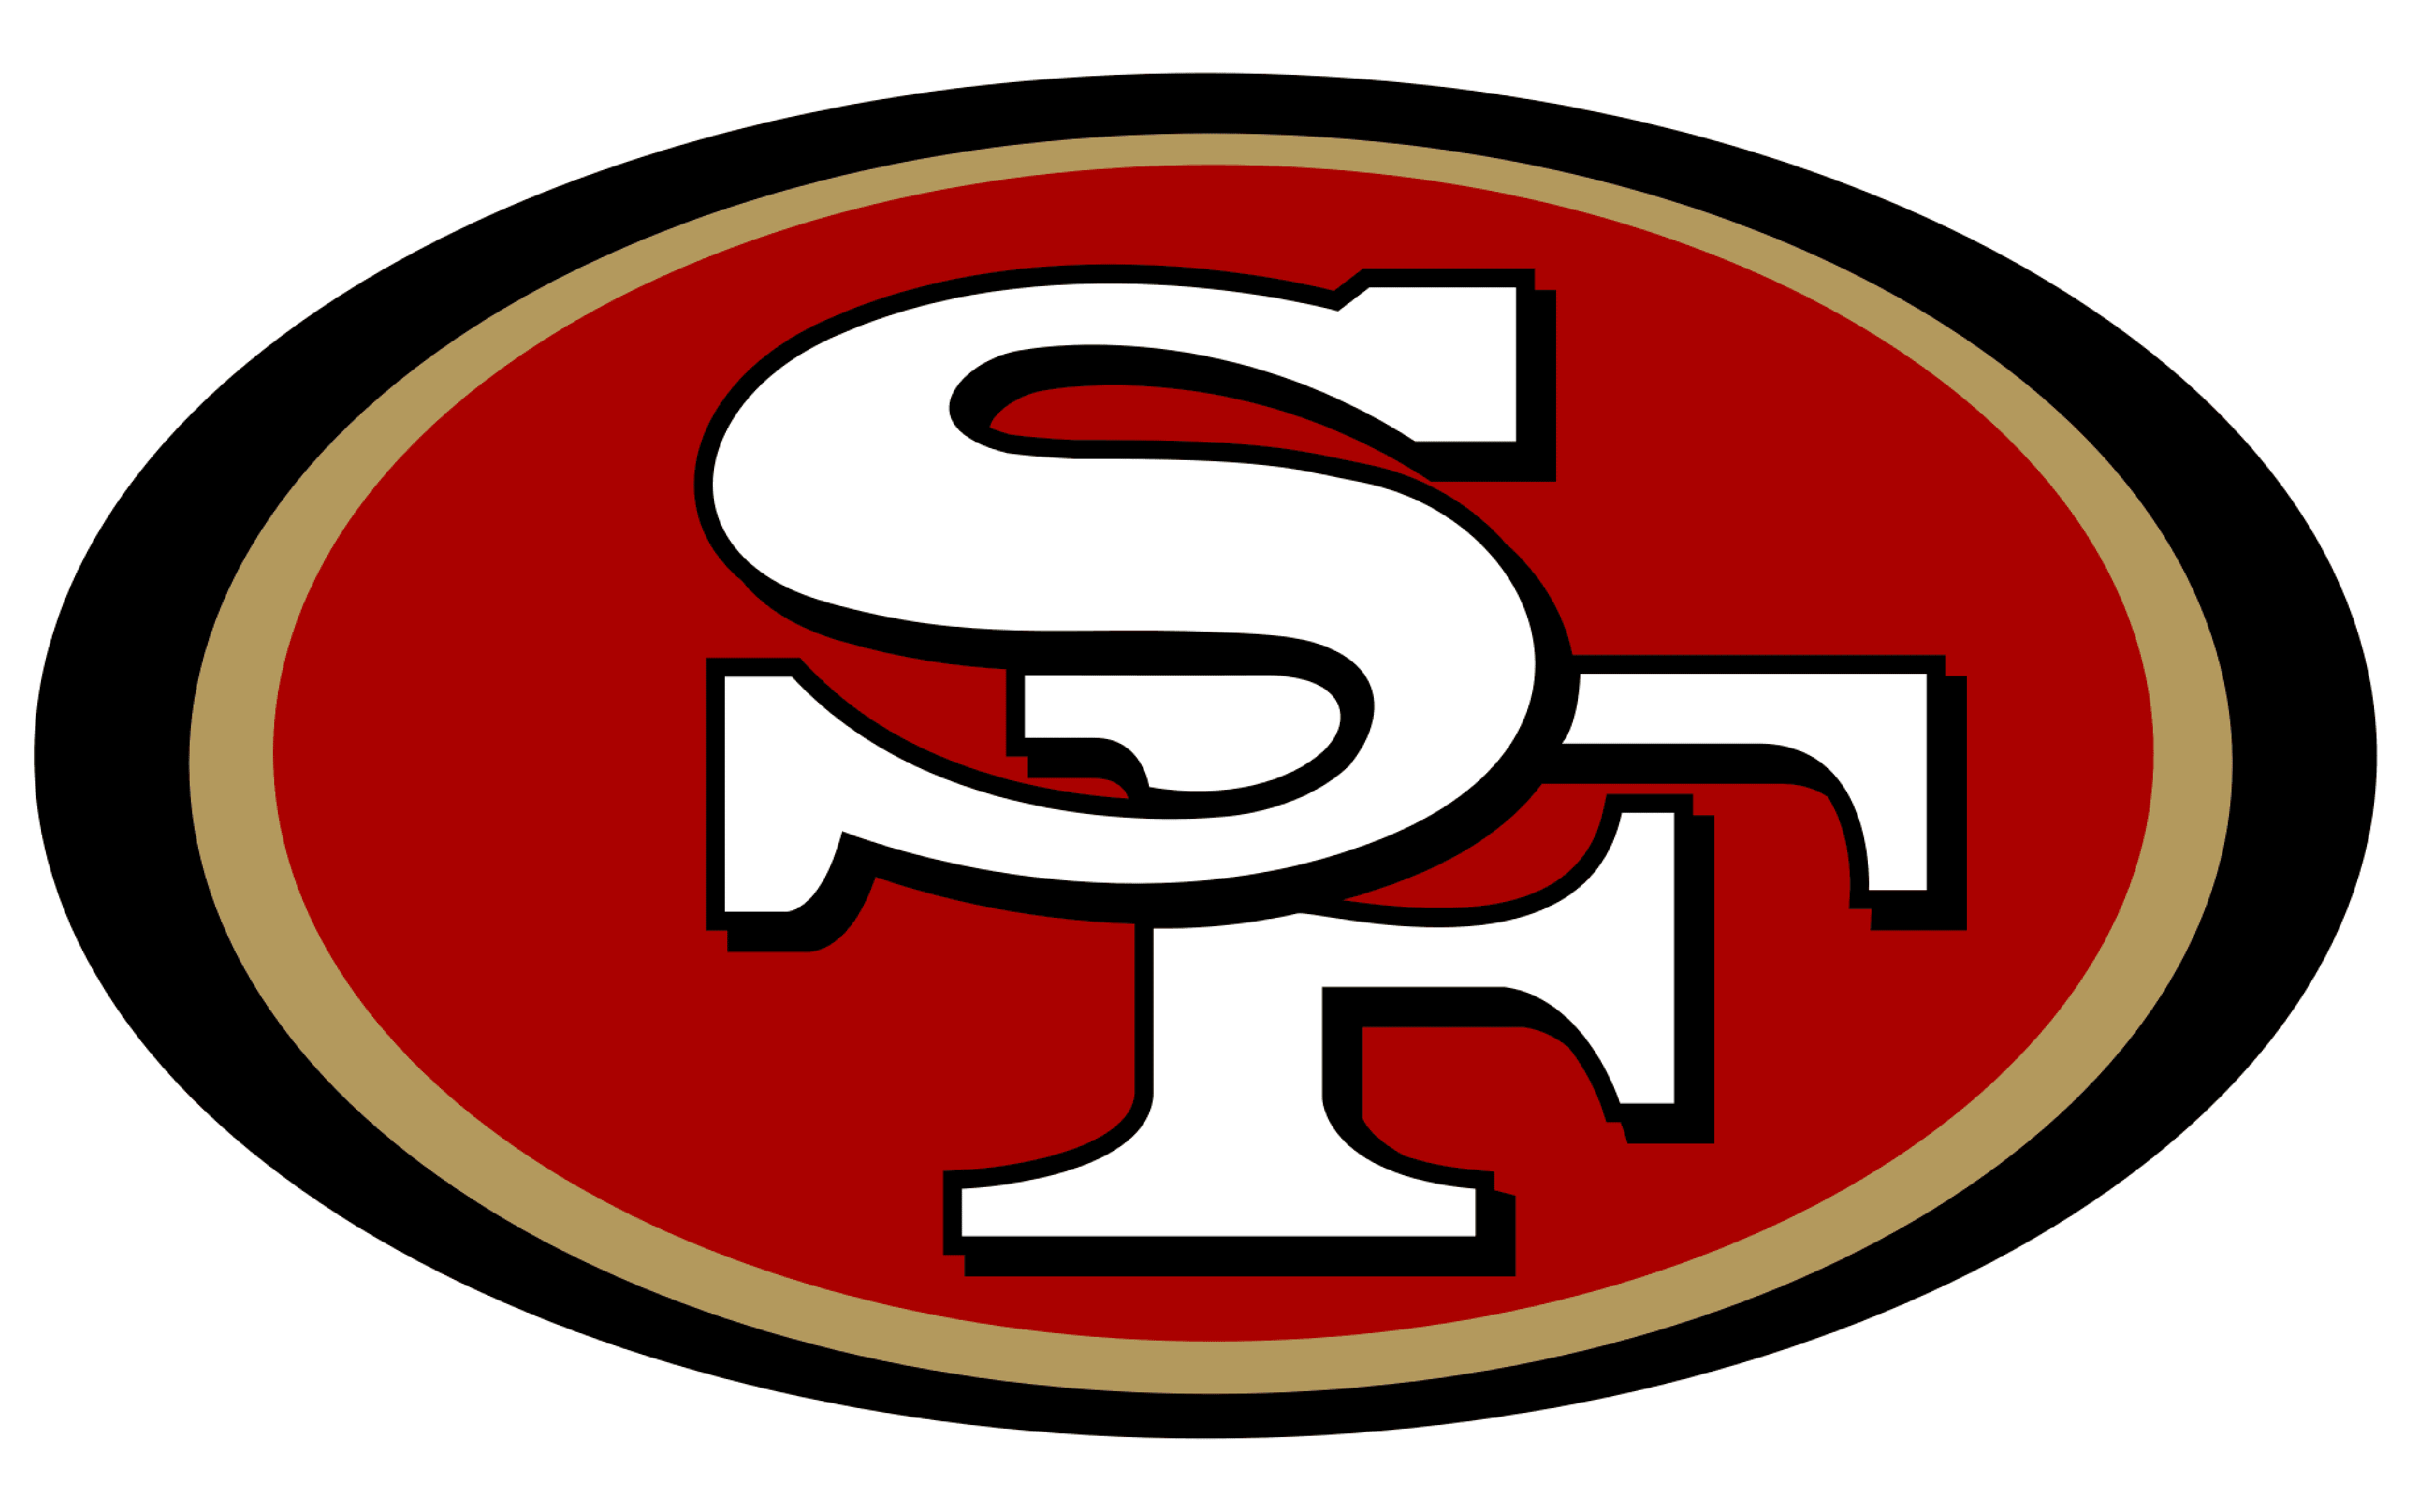 Download 800 49ers logo white background For sport designs and posters